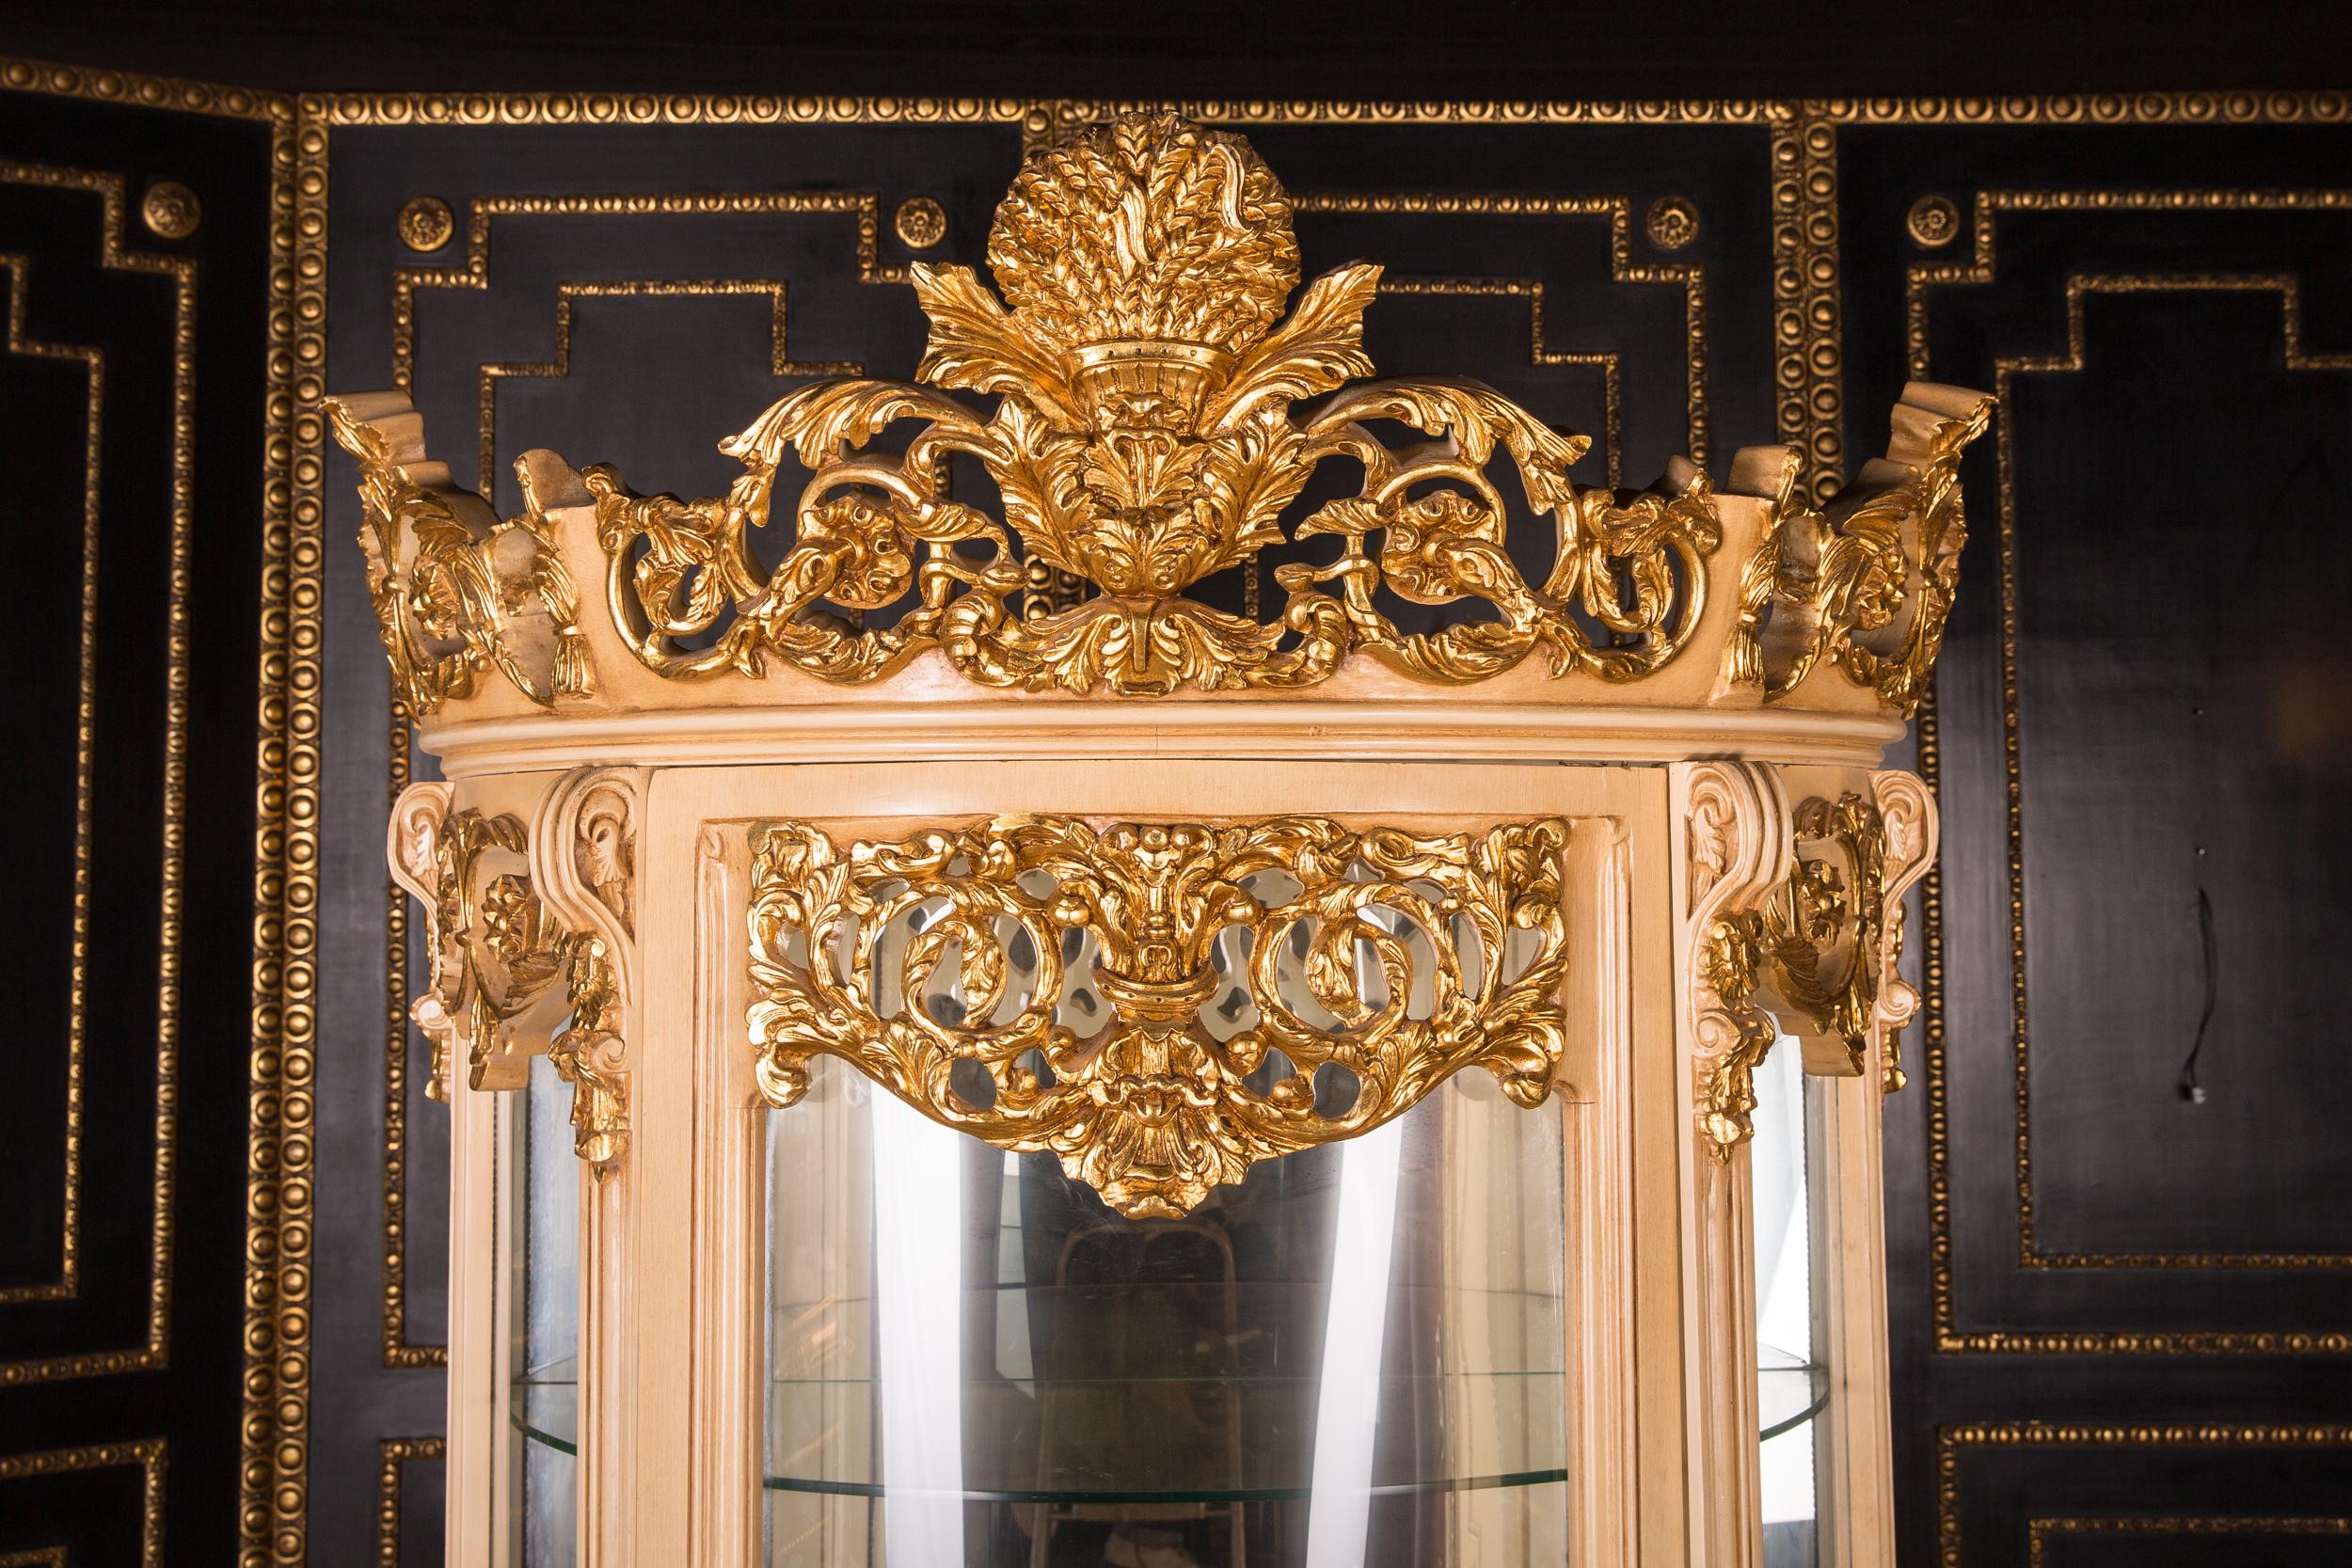 Hand-Carved Monumental French Vitrine in the Style of the 18th Century